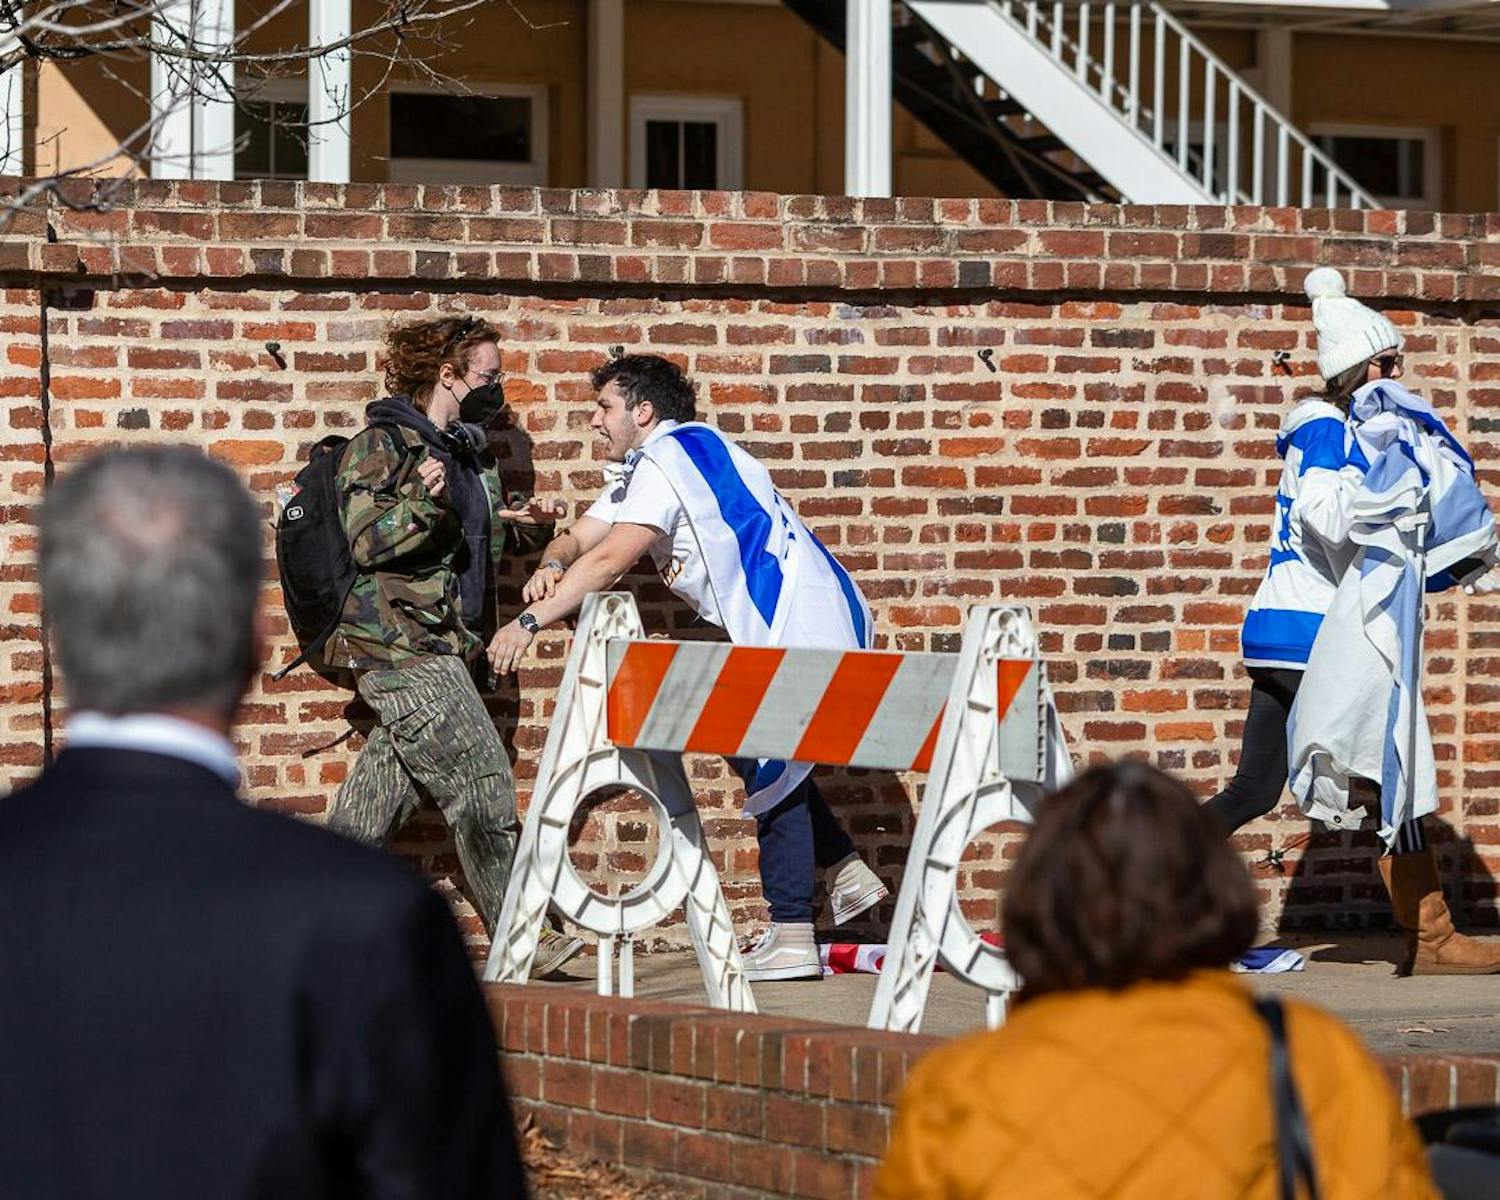 A rally organizer (right) pushes back a counter-protester (left) during the pro-Israel rally on Greene Street on Dec. 7, 2023. The short altercation began after the camouflaged protestor began tearing down Israeli and United States flags hanging up on the wall for the rally while another protestor took the microphone to accuse Israel of committing genocide and call the U.S. complicit.